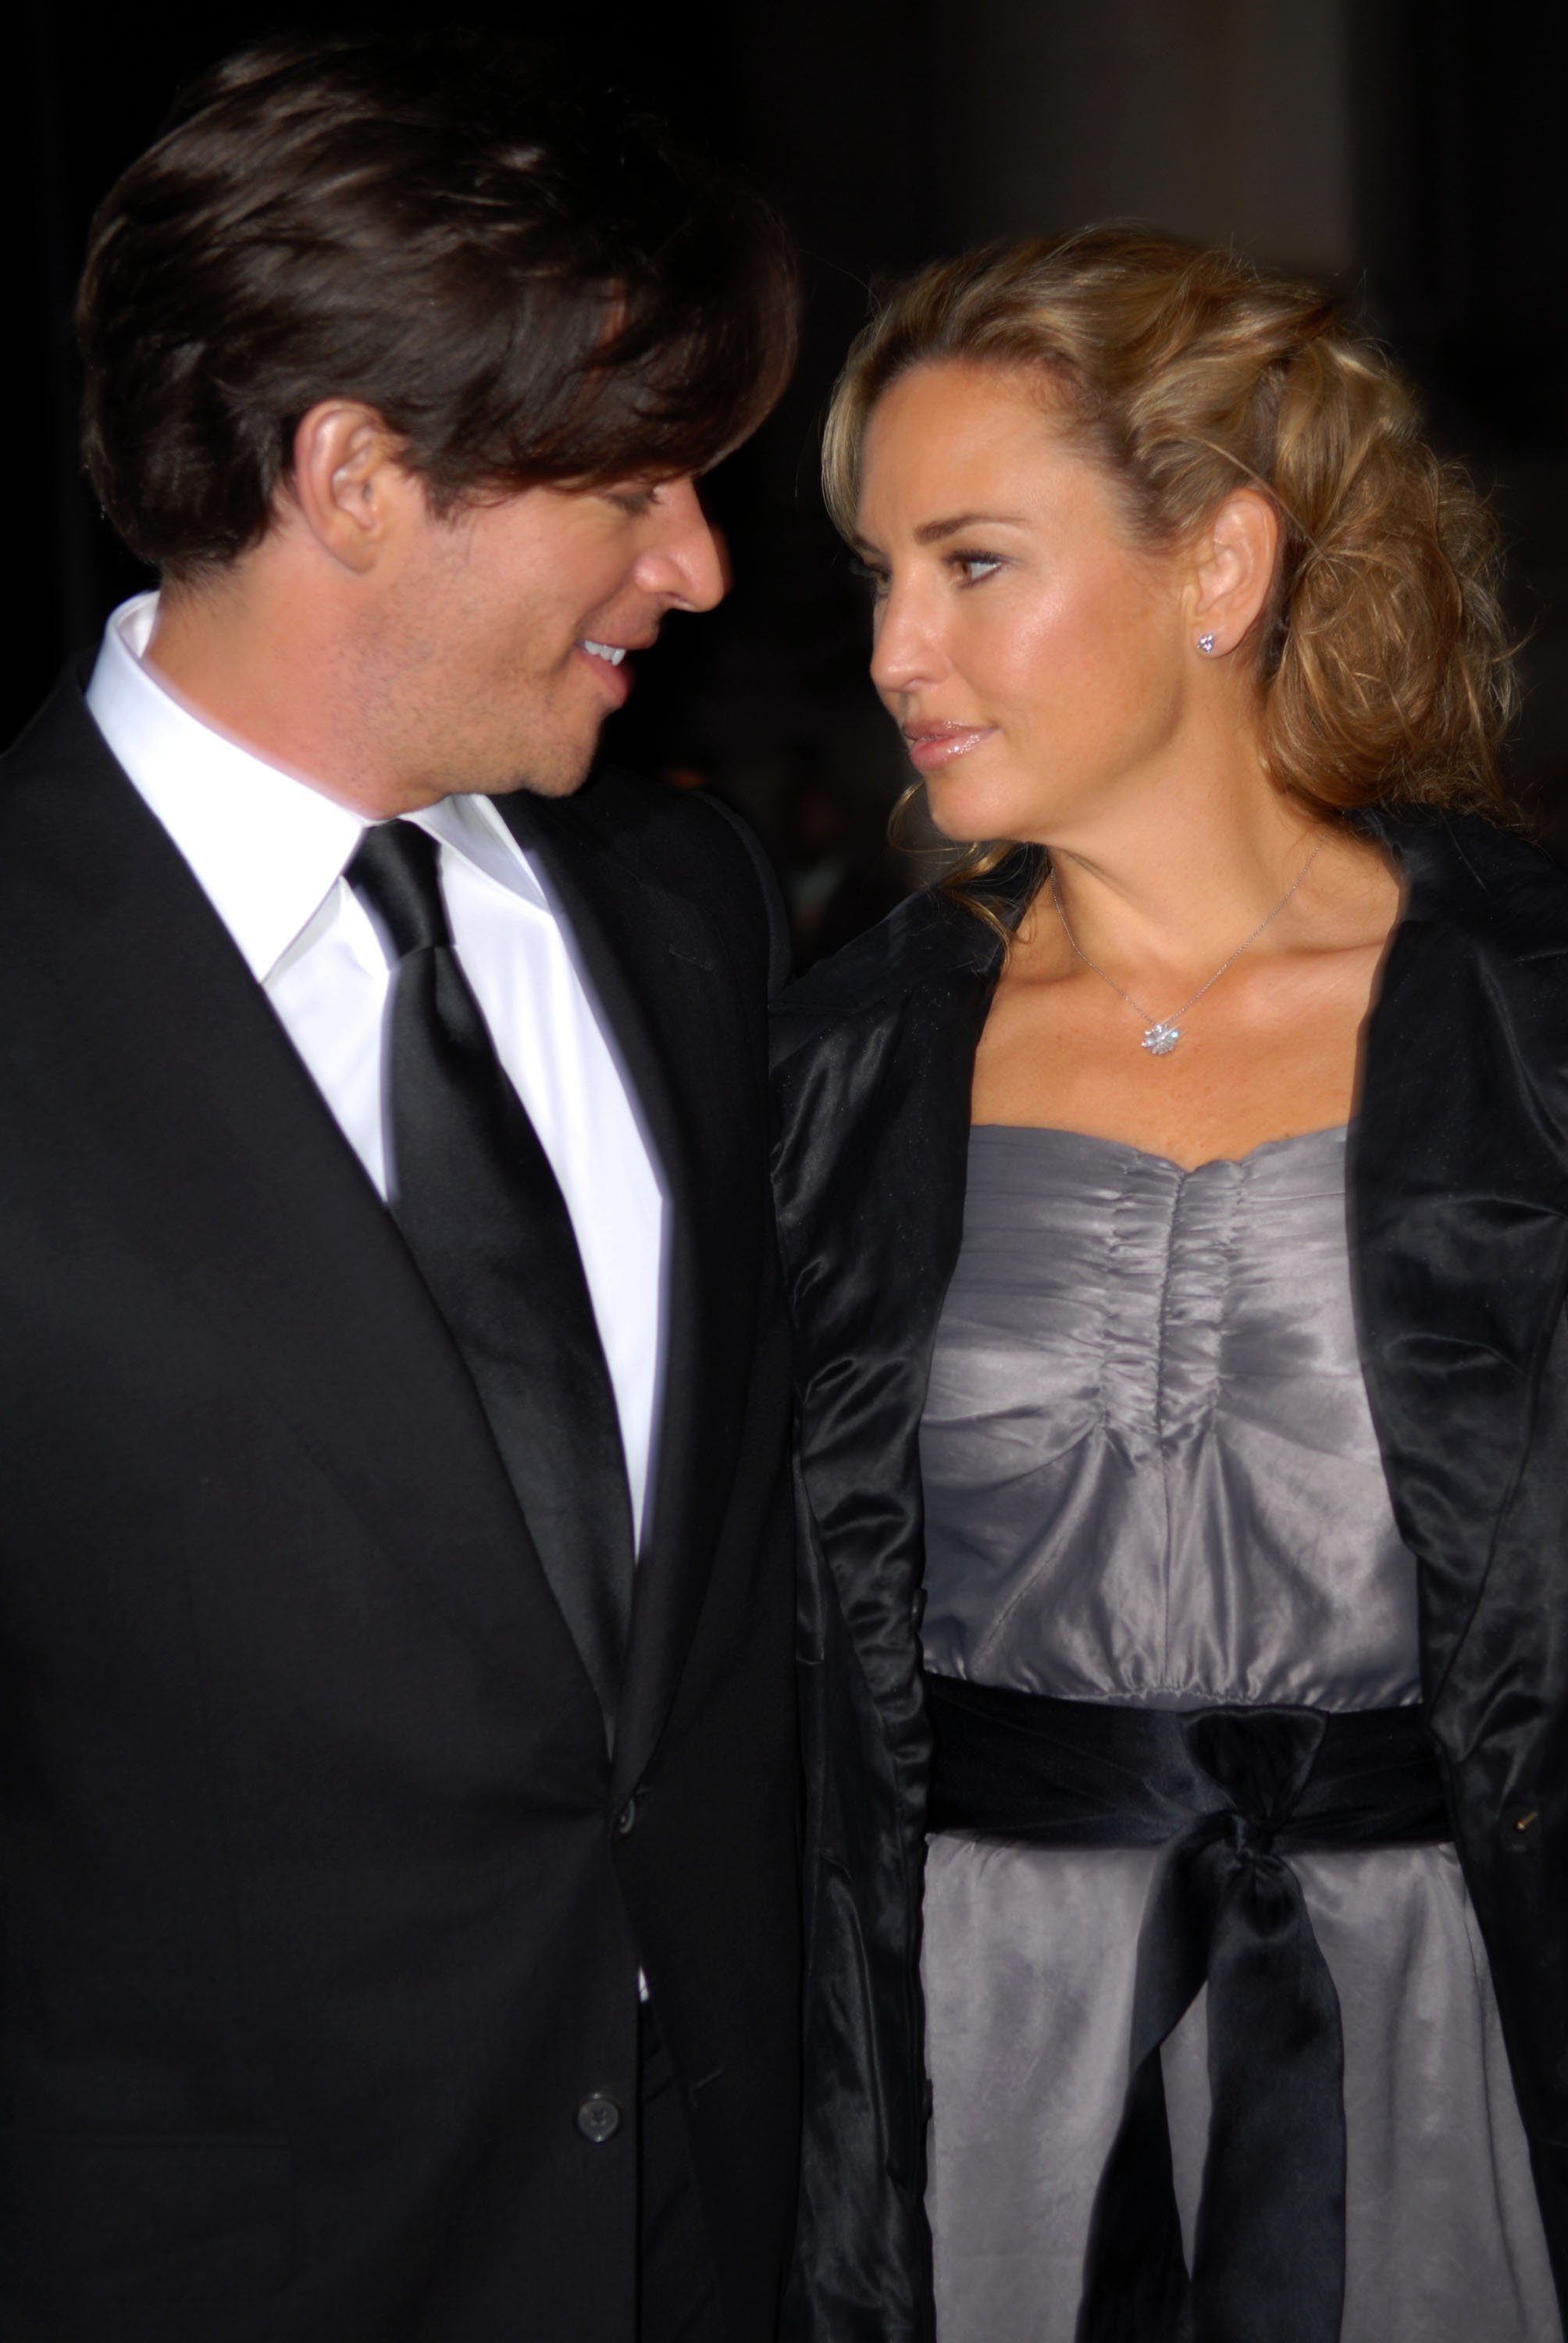 Harry Connick Jr. and Jill Goodacre during The Second Annual Quill Awards Gala at The American Museum of Natural History in New York City, New York, United States | Photos : Getty images